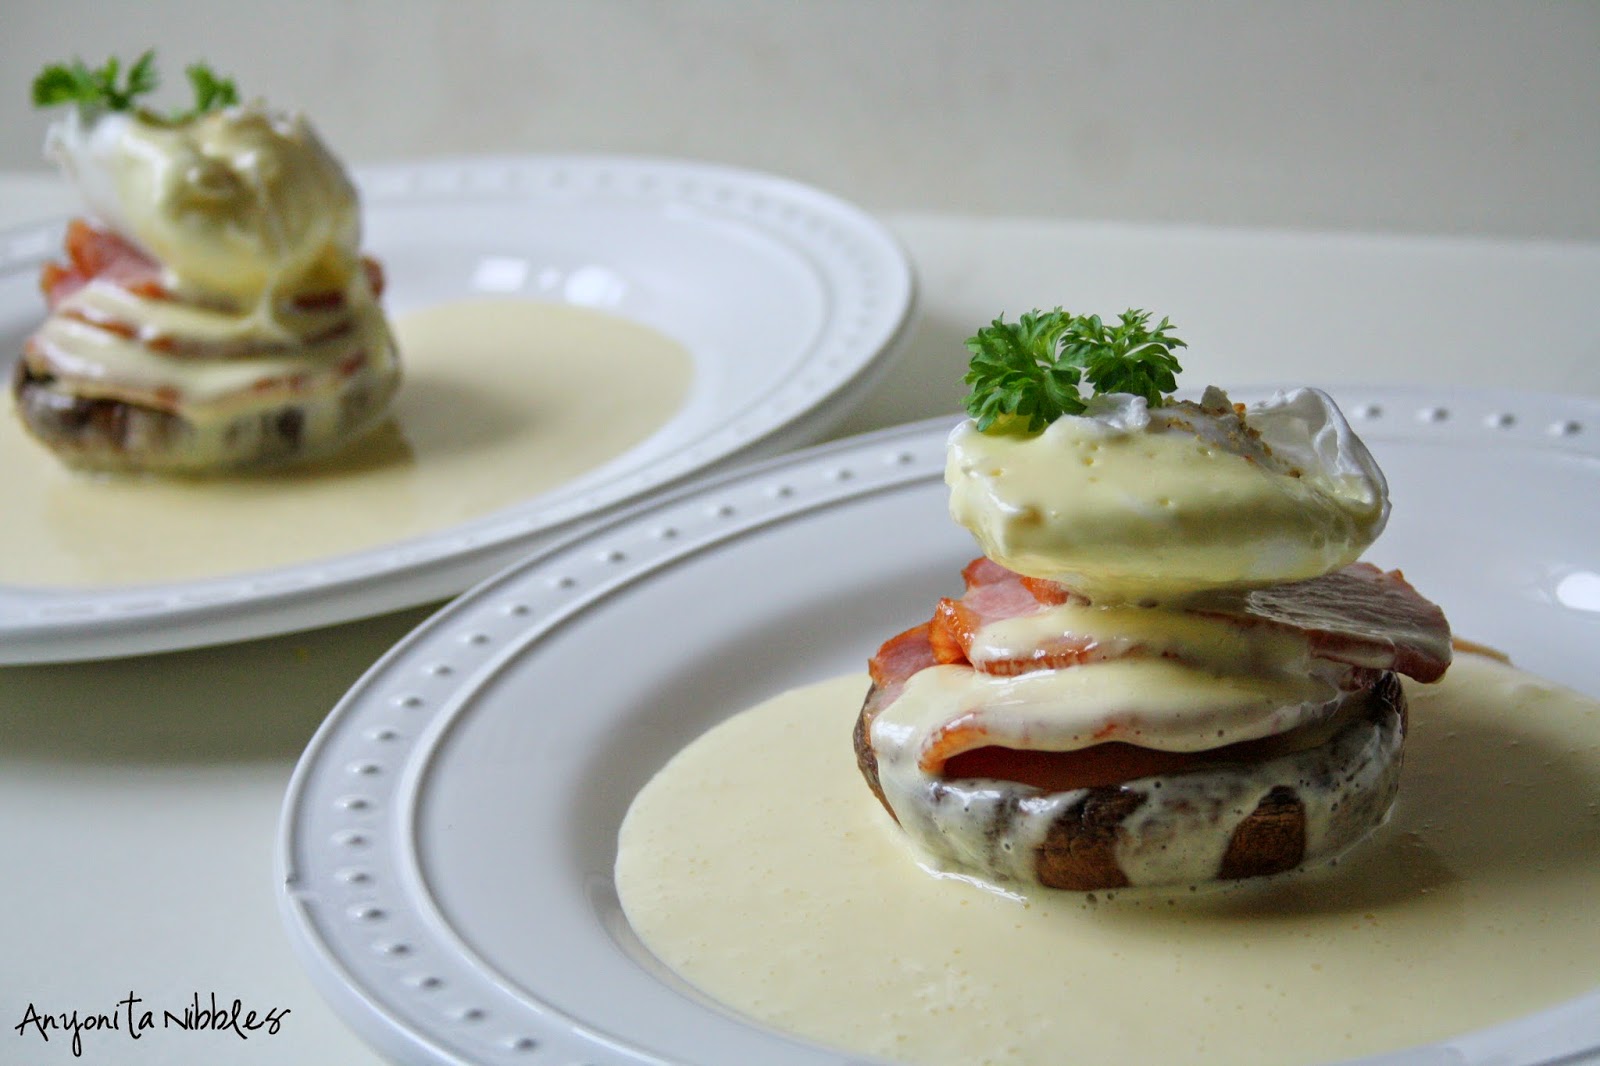 She used grilled portabellos to replace the brioche or English muffins in this eggs Benedict dish and make it gluten free from Anyonita Nibbles